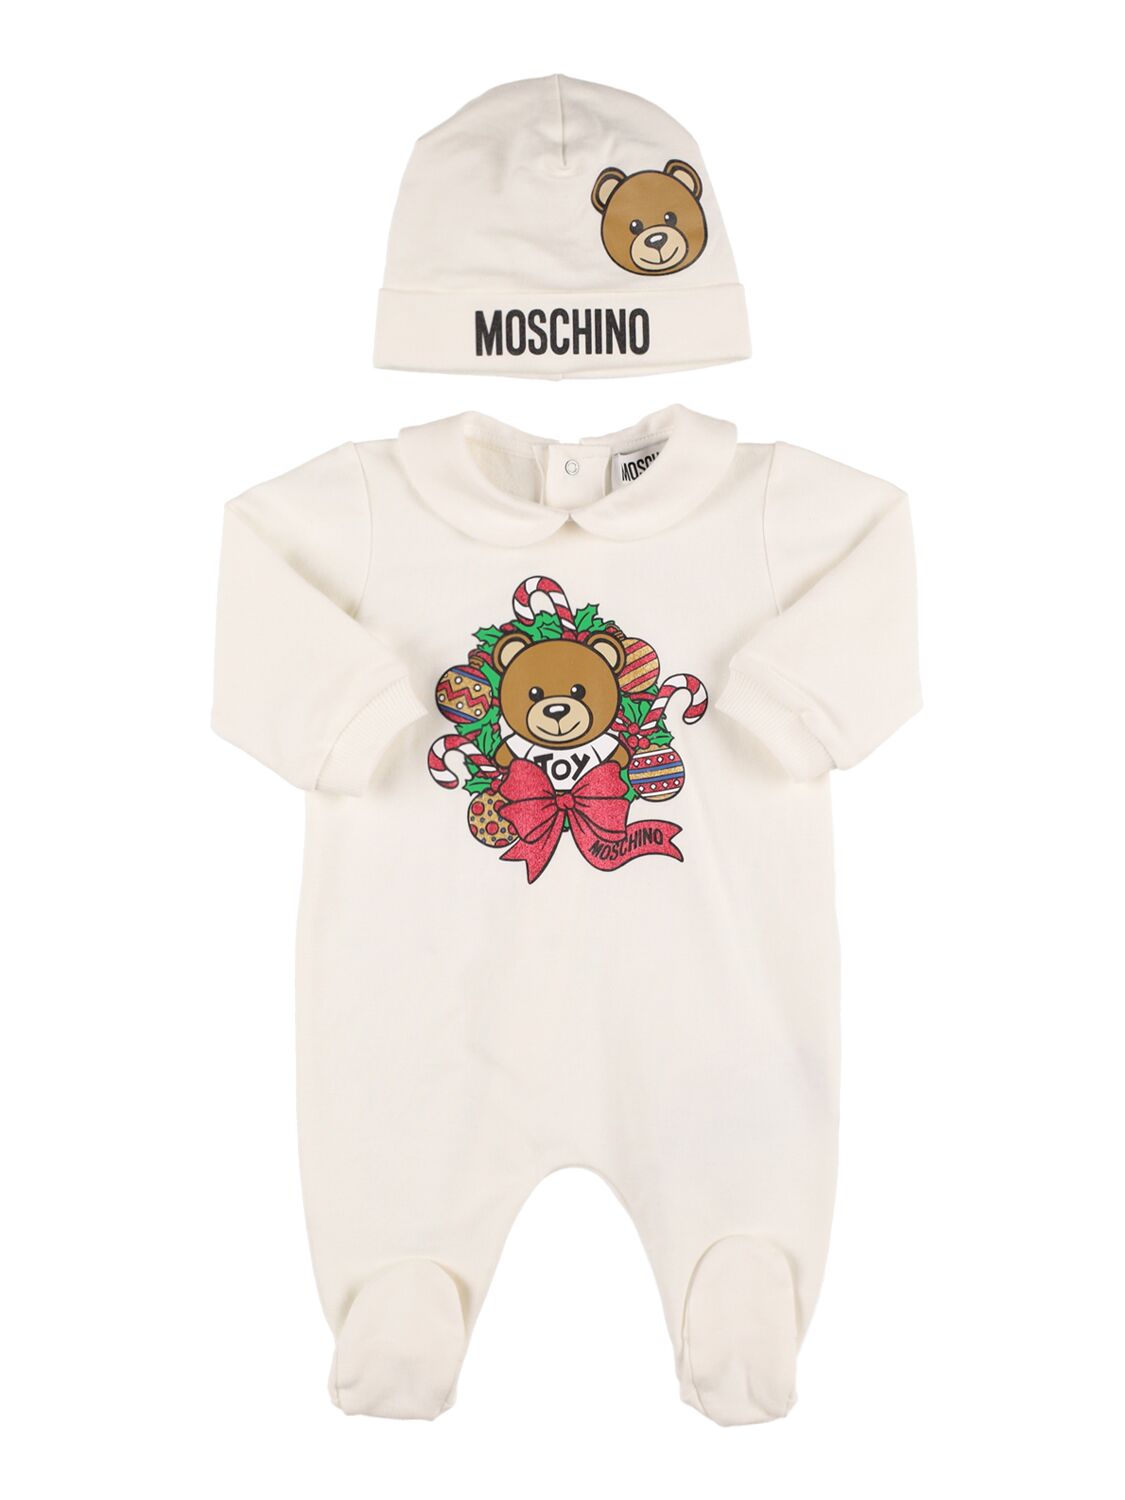 Moschino Babies' Printed Cotton Romper & Hat In White